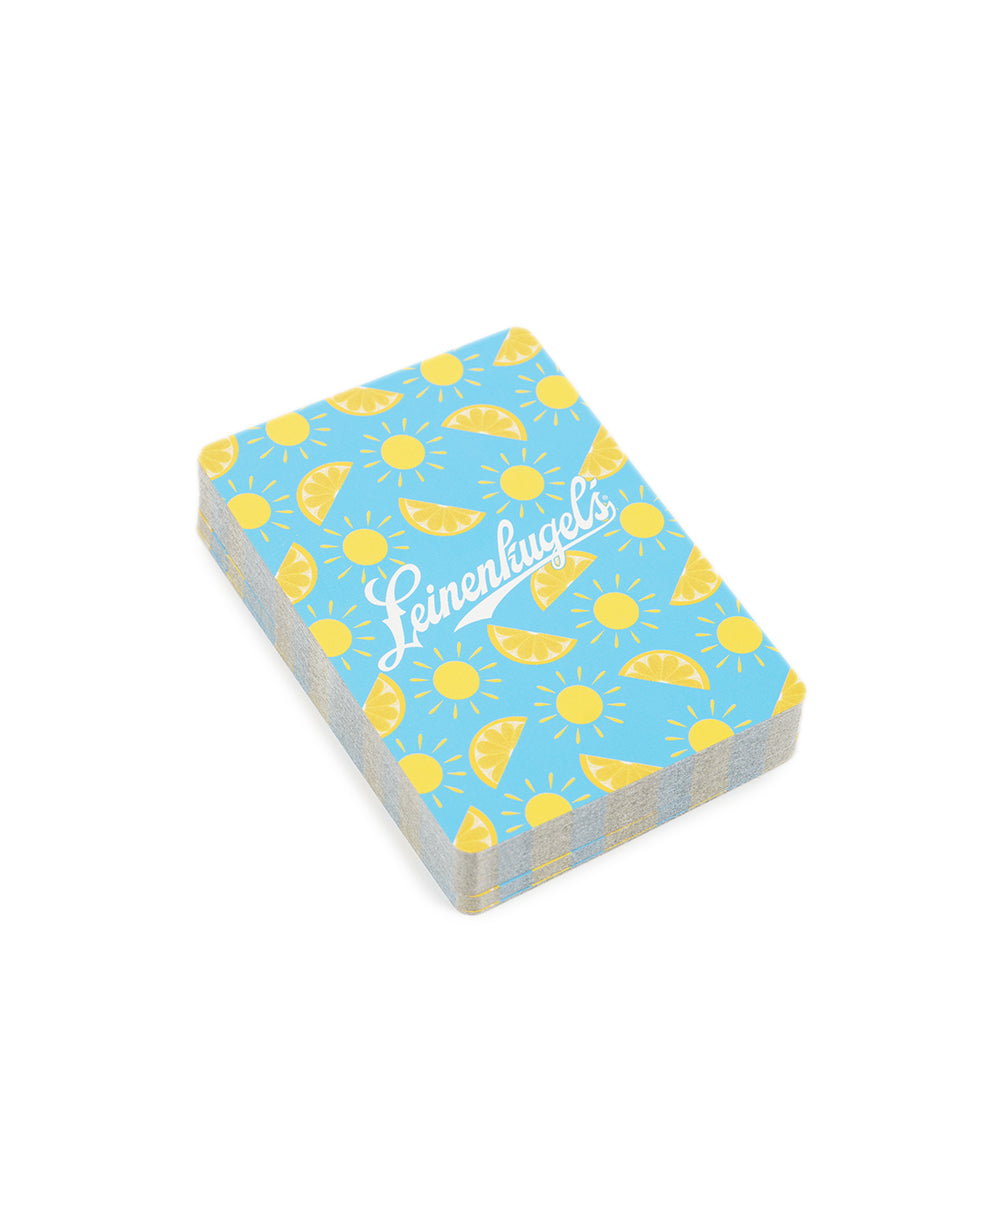 SUMMER SHANDY PLAYING CARDS